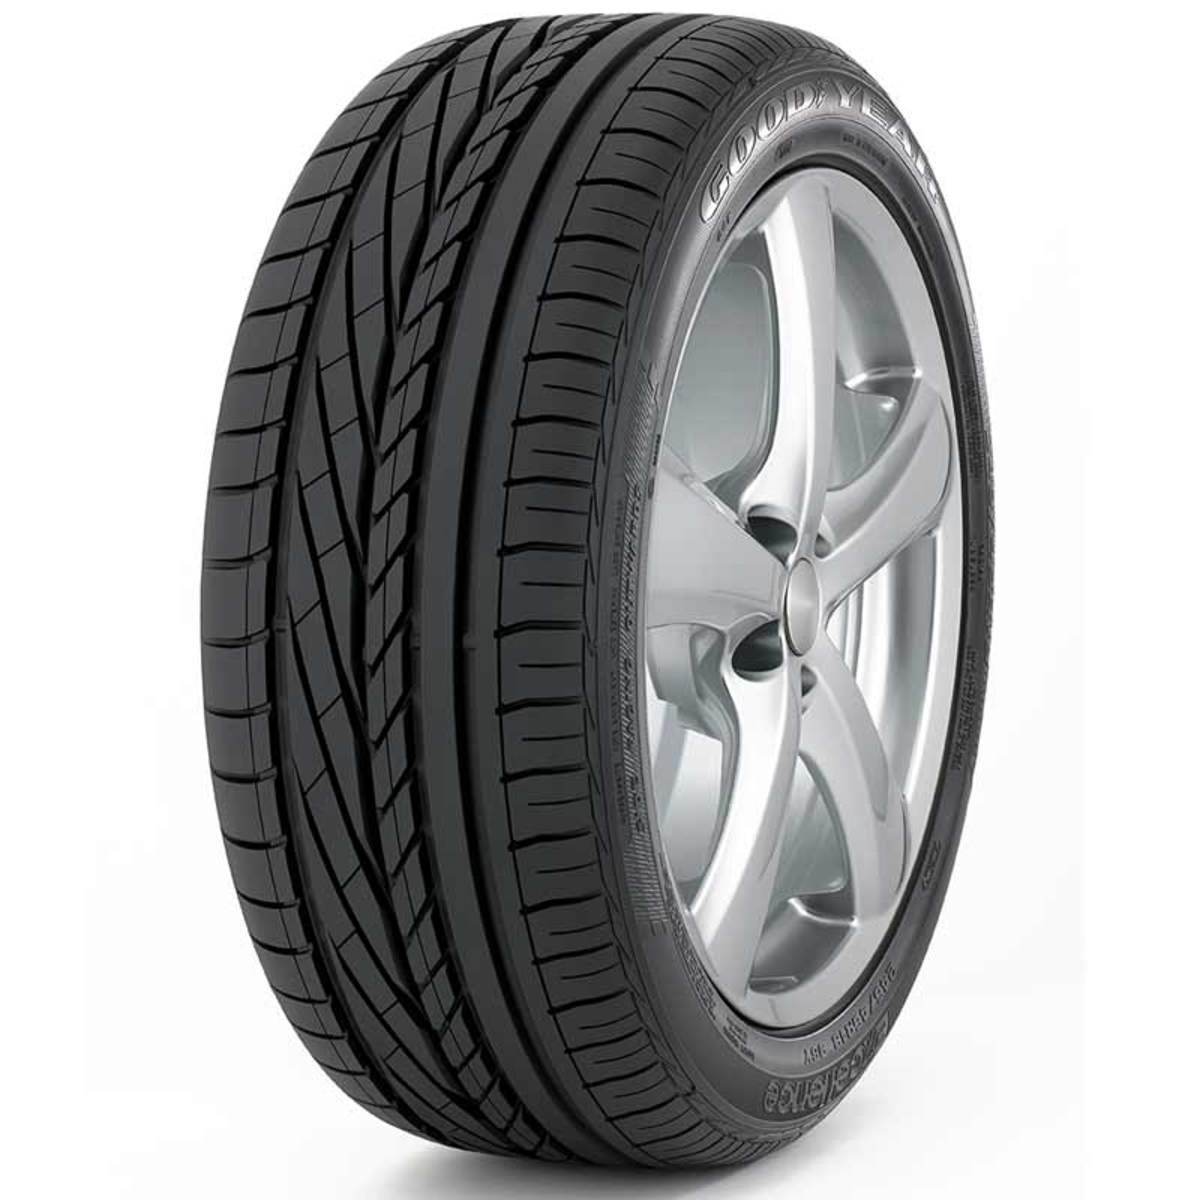 Goodyear 195/55 R16 (87) H EXCELLENCE ROF